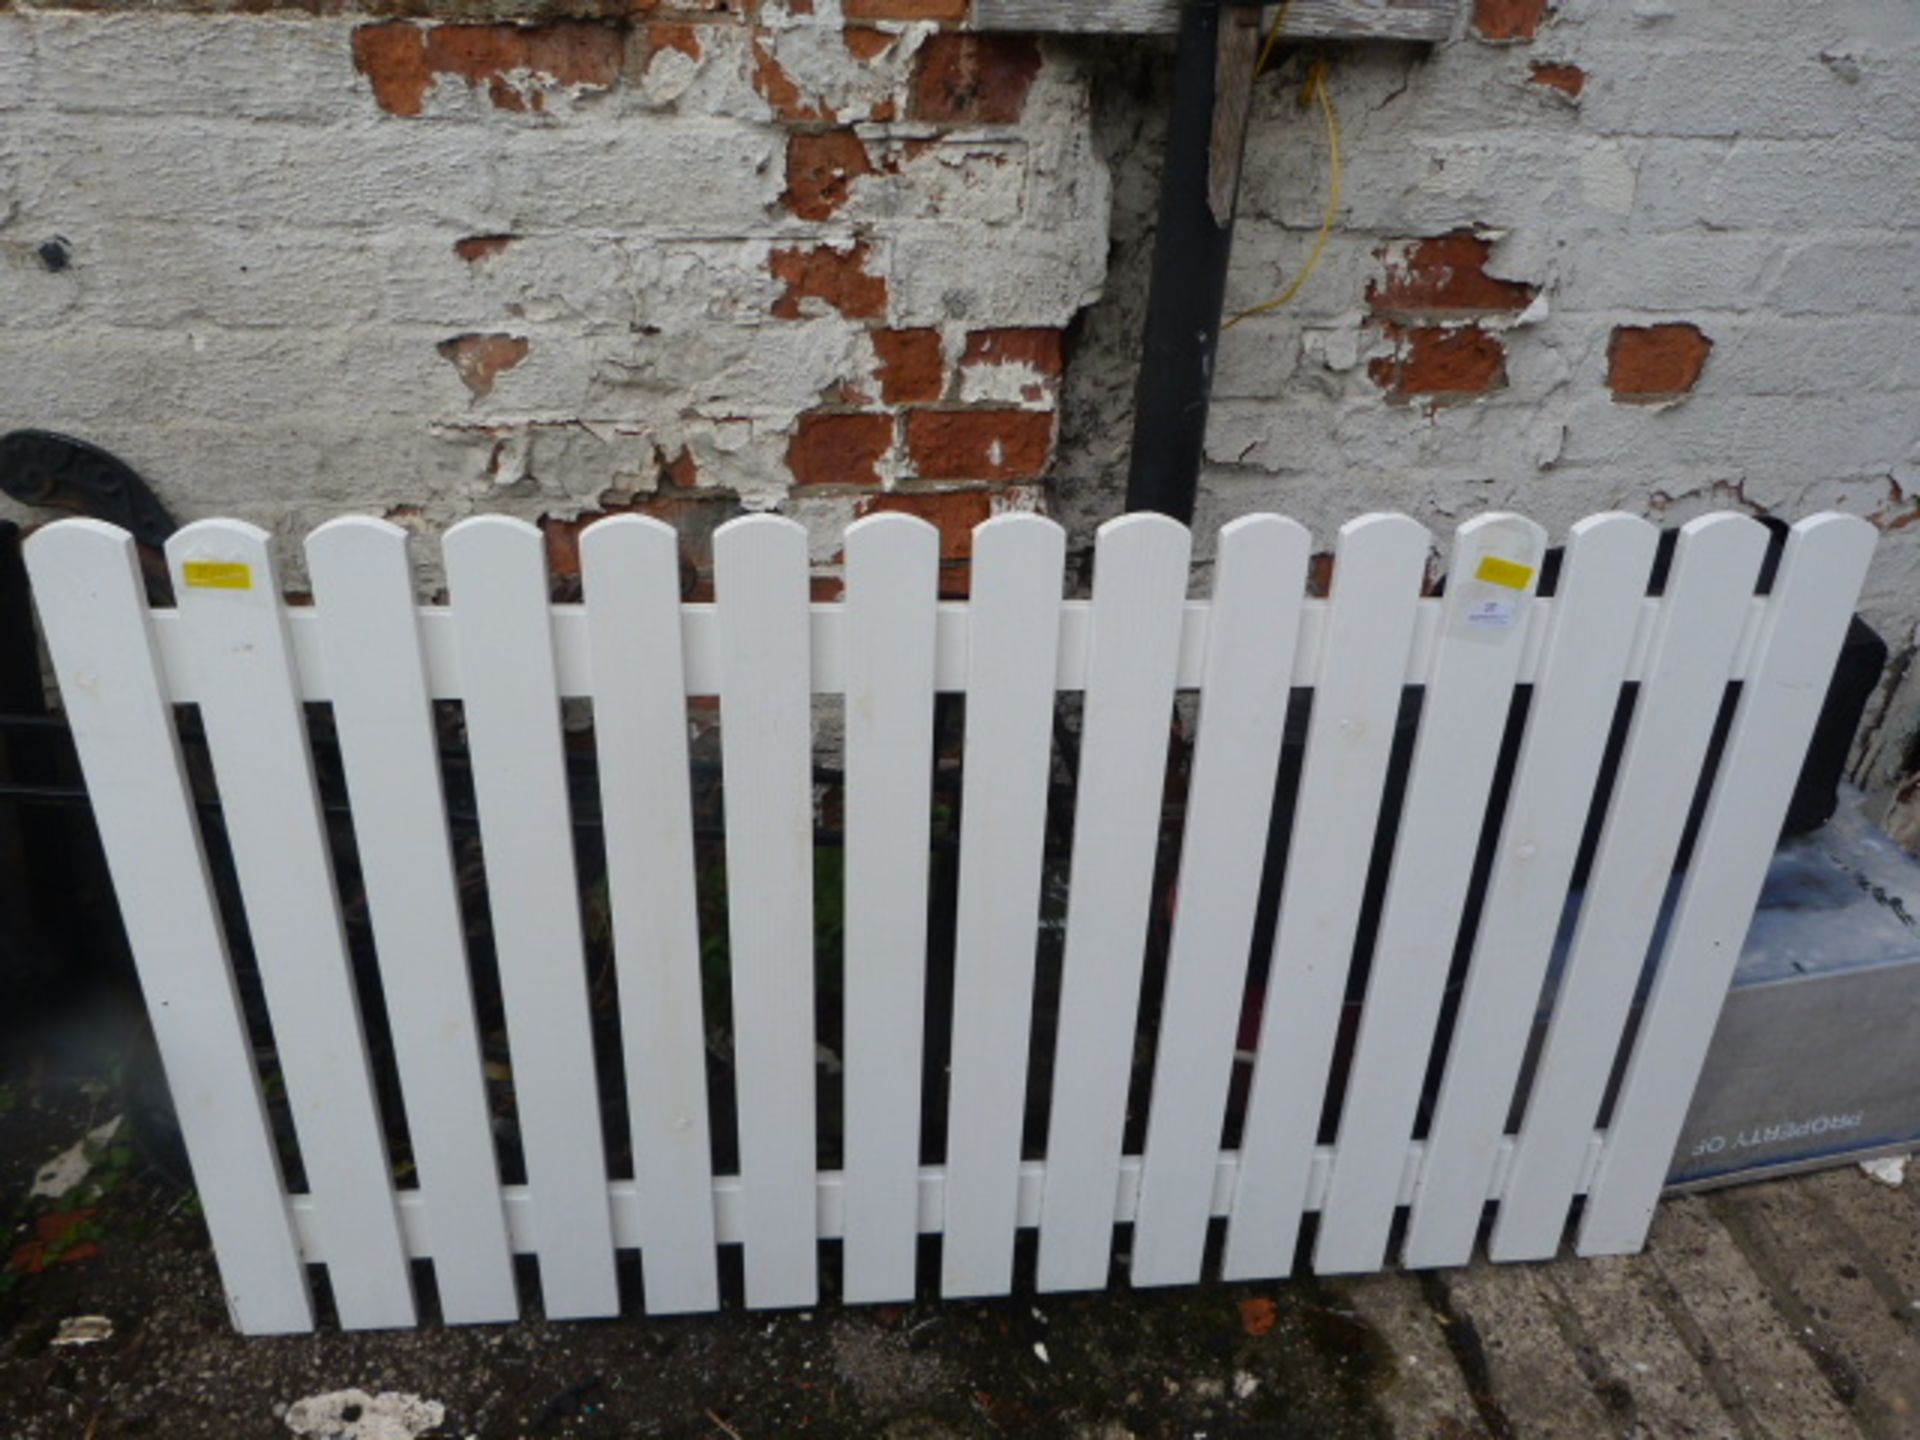 Small Section of White Fencing